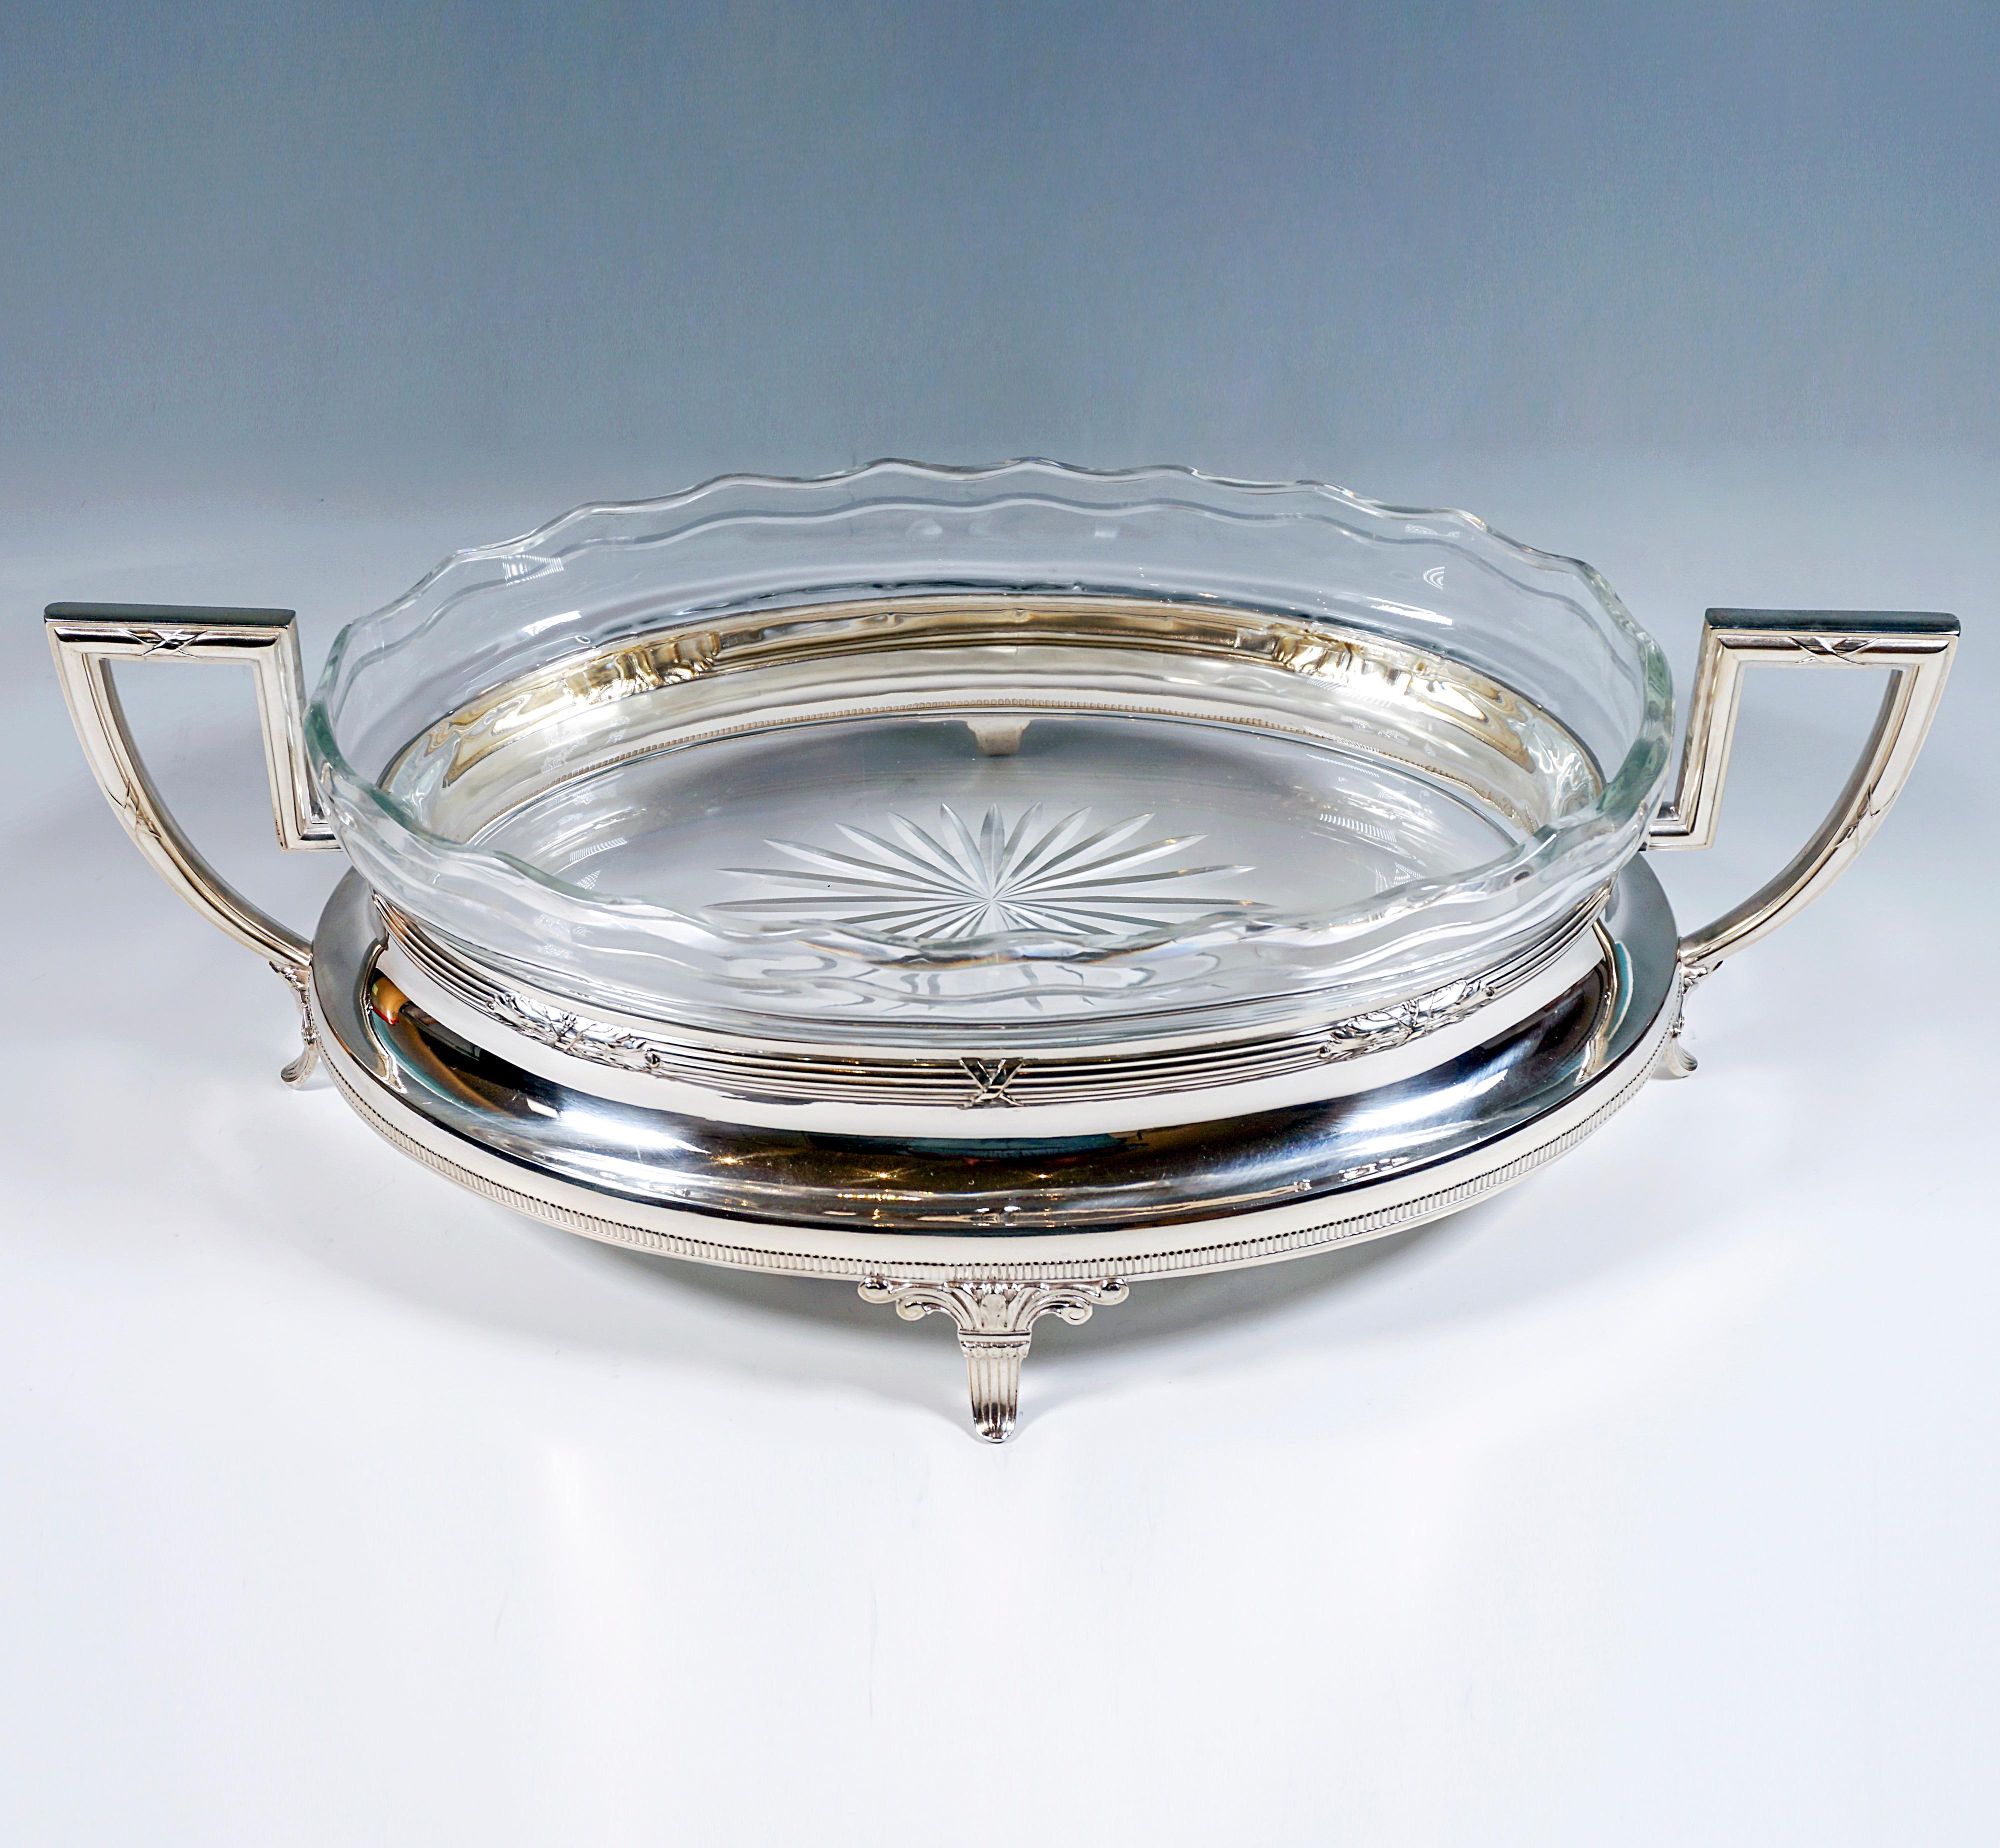 Elegant silver jardinière of elliptical base form on four flared feet with volute bond, downwardly flaring smooth wall with delicate ribbed band at the lower rim, constriction at the upper rim by profiled cross band with floral ornamental elements,